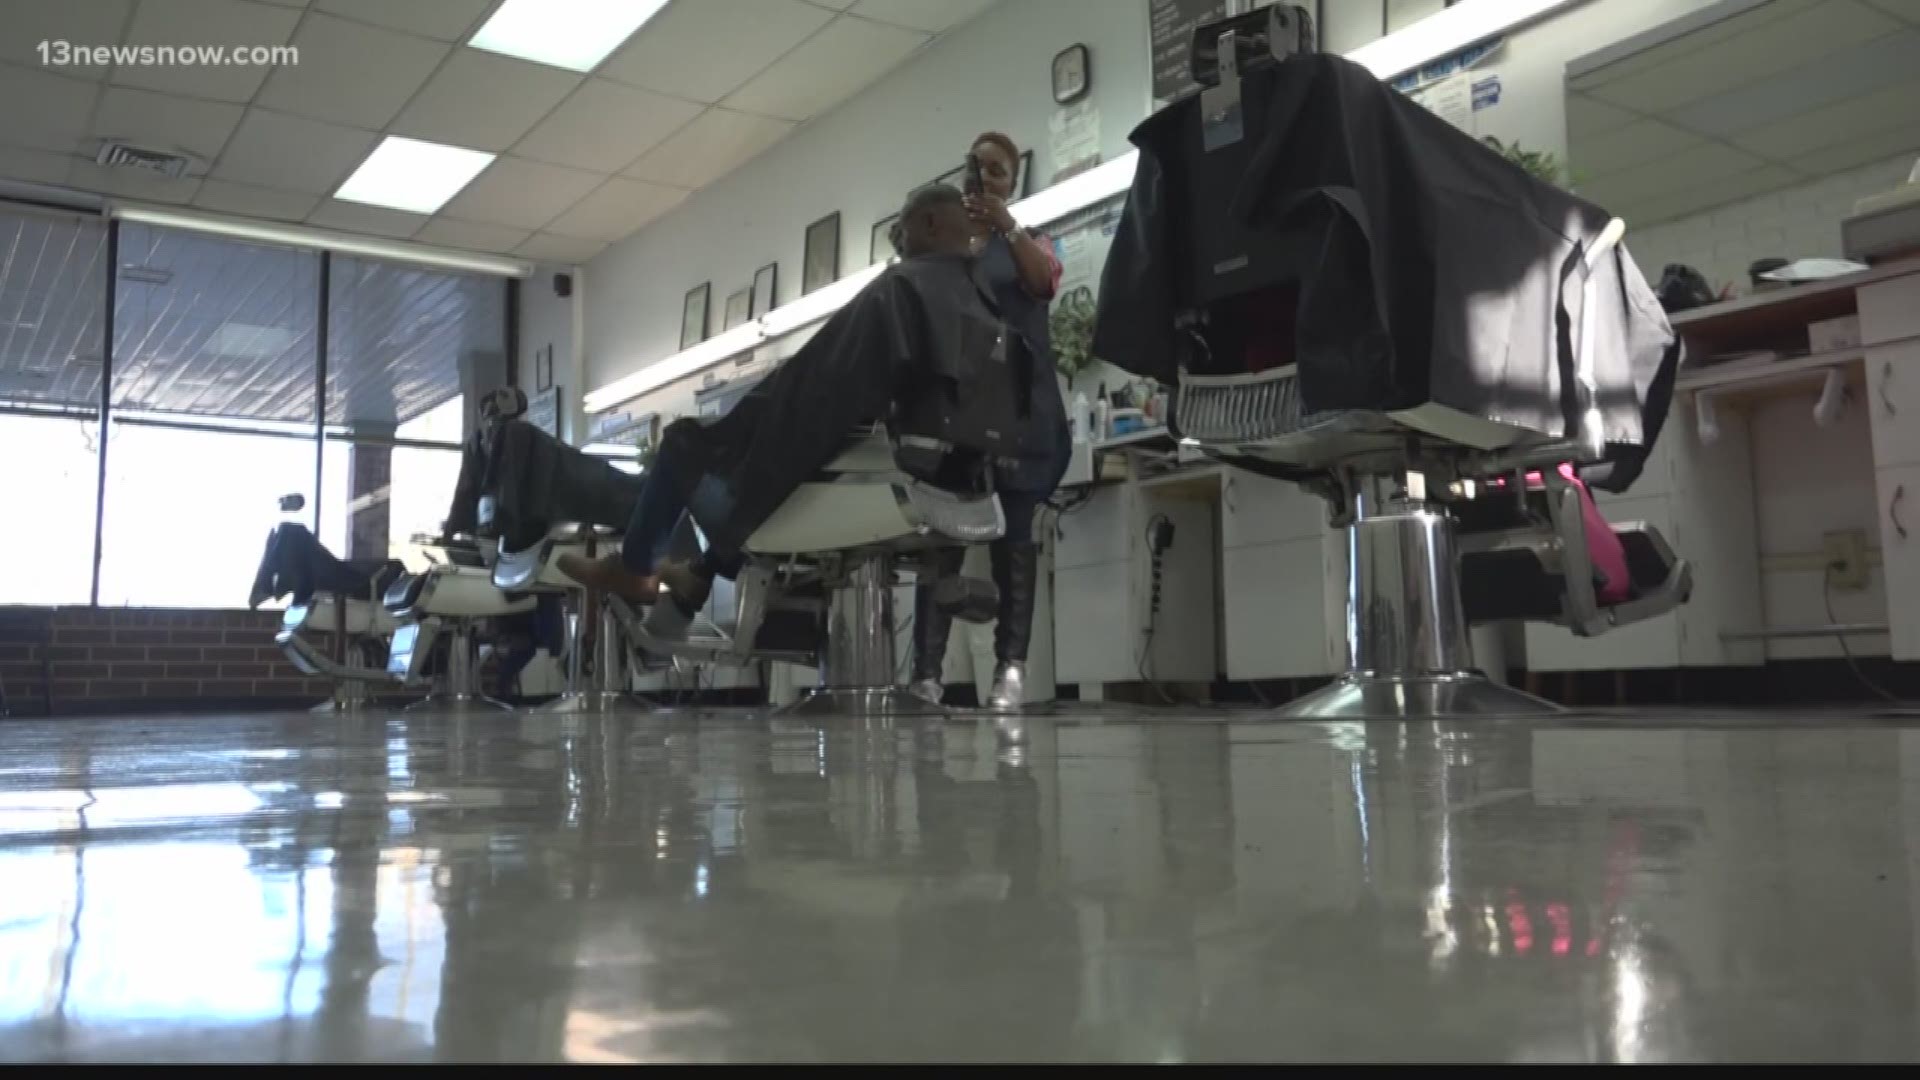 A local barber is helping furloughed workers by offering free haircuts.